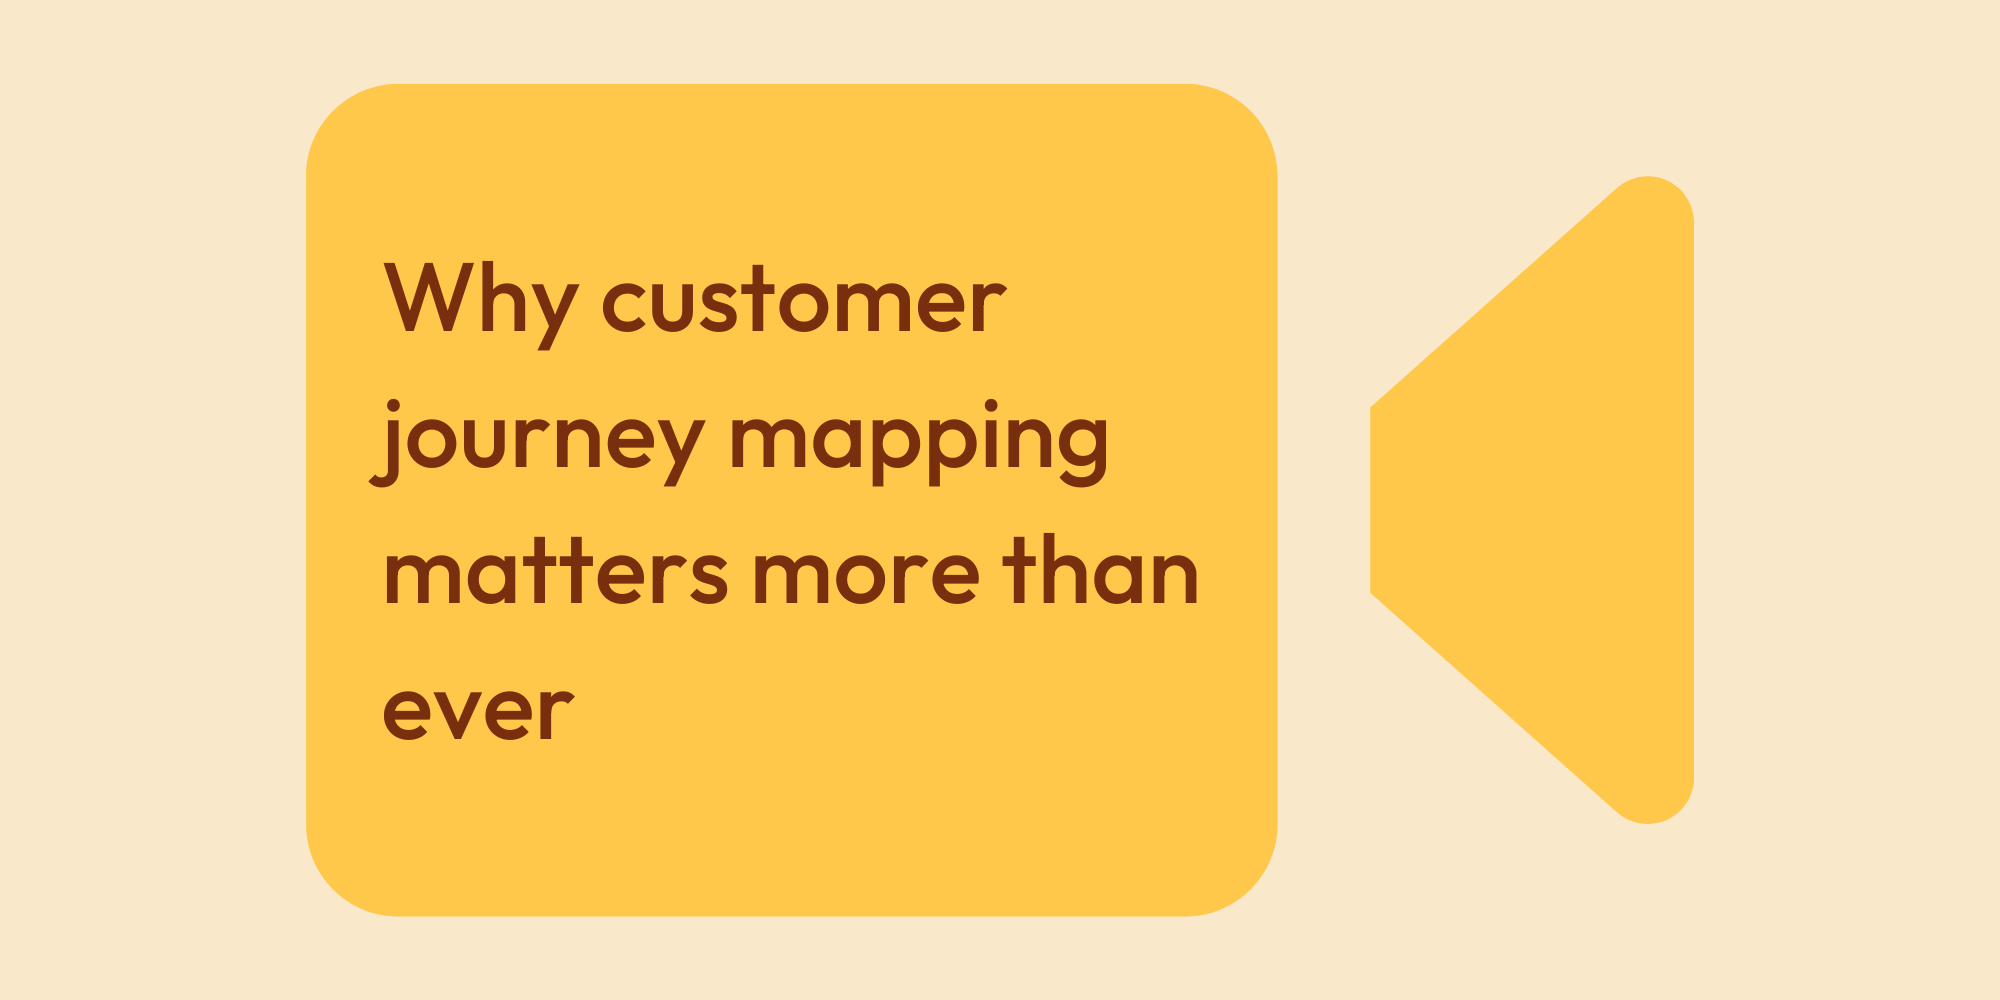 Why customer journey mapping matters more than ever